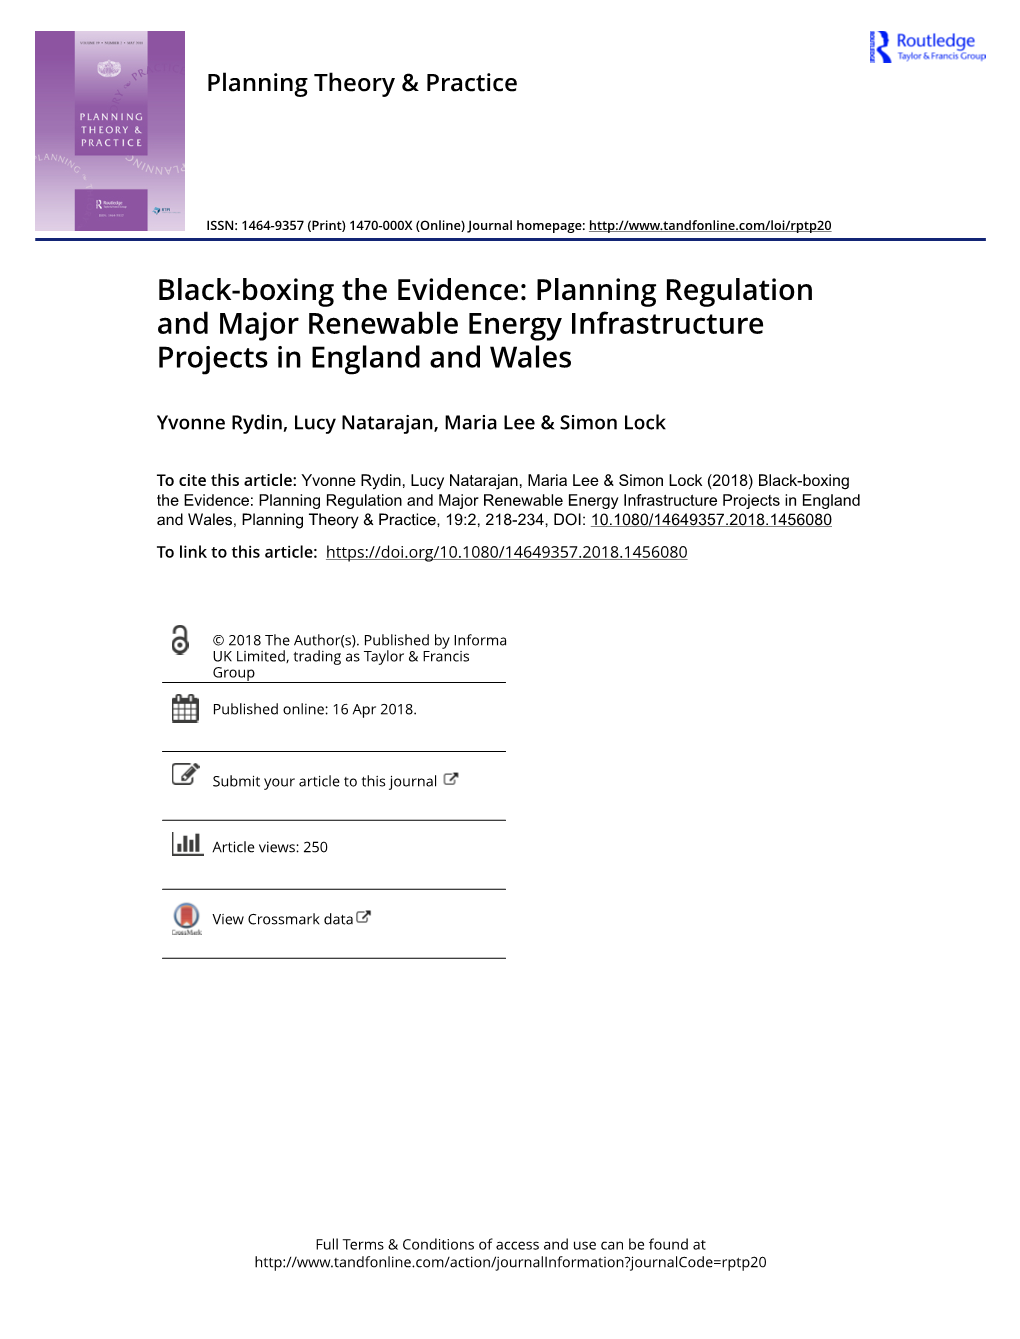 Black-Boxing the Evidence: Planning Regulation and Major Renewable Energy Infrastructure Projects in England and Wales